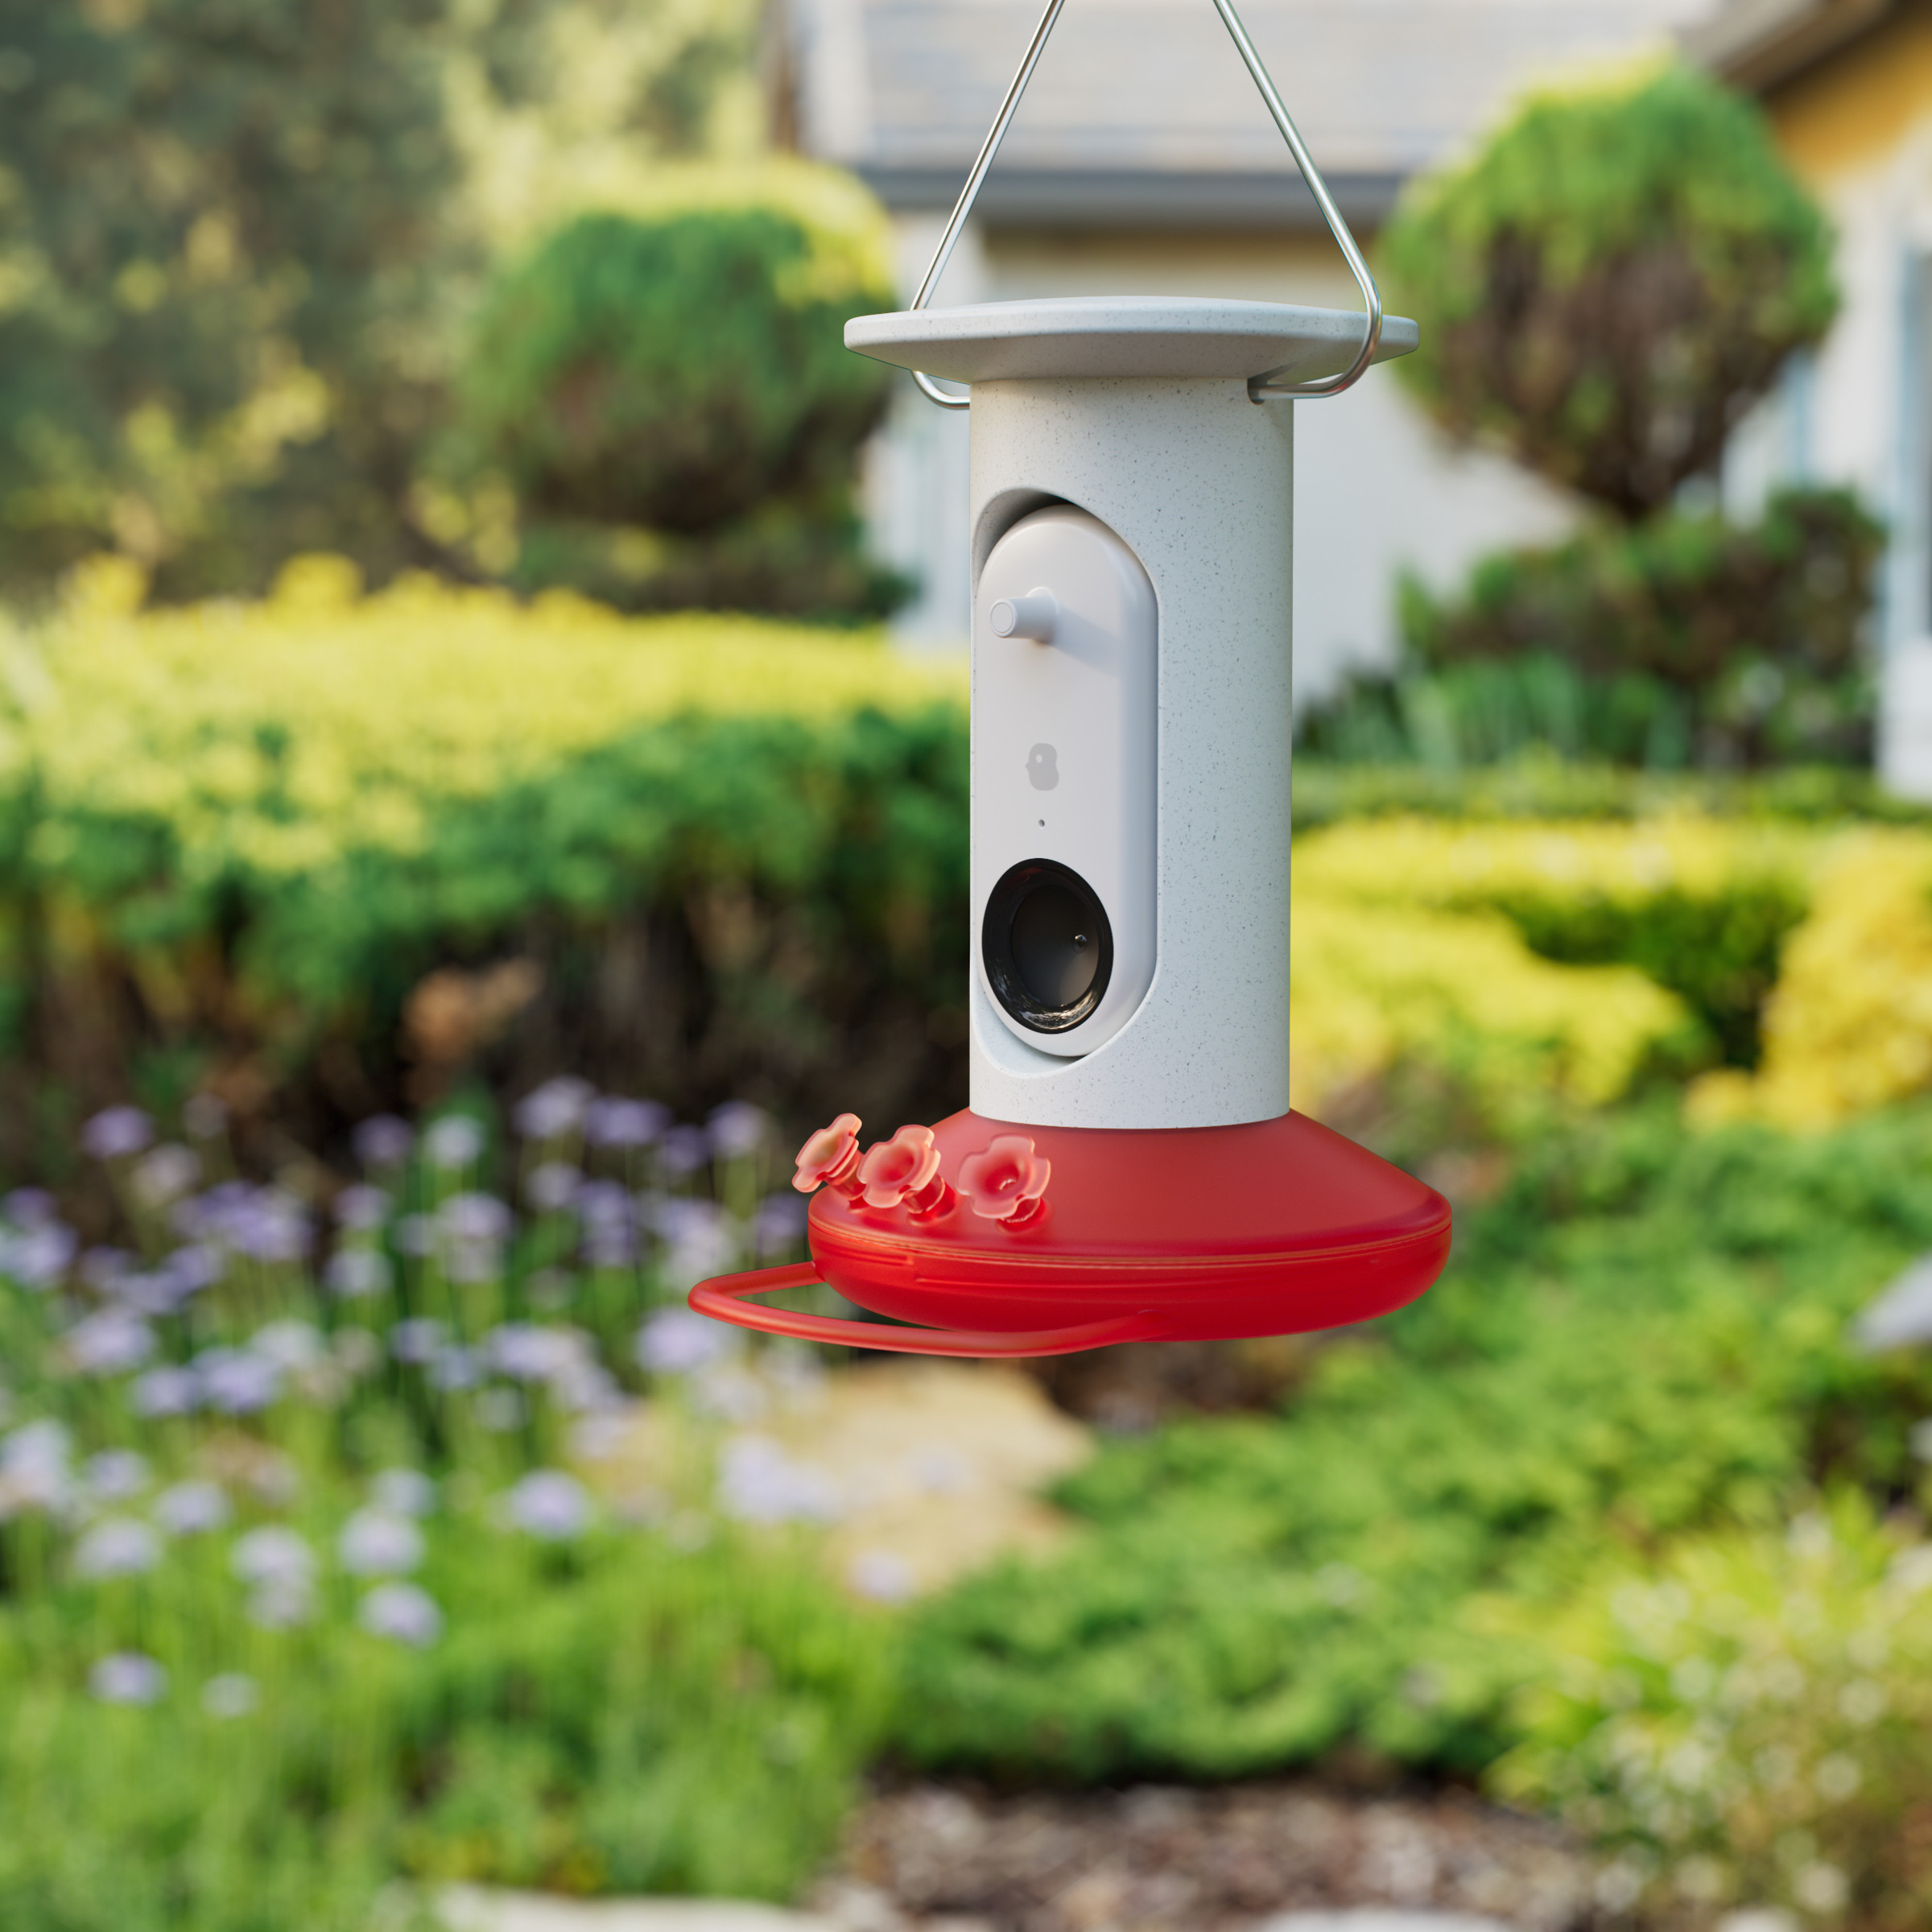 Picture of the Bird Buddy Smart hummingbird feeder hanging up in front of some flowers.